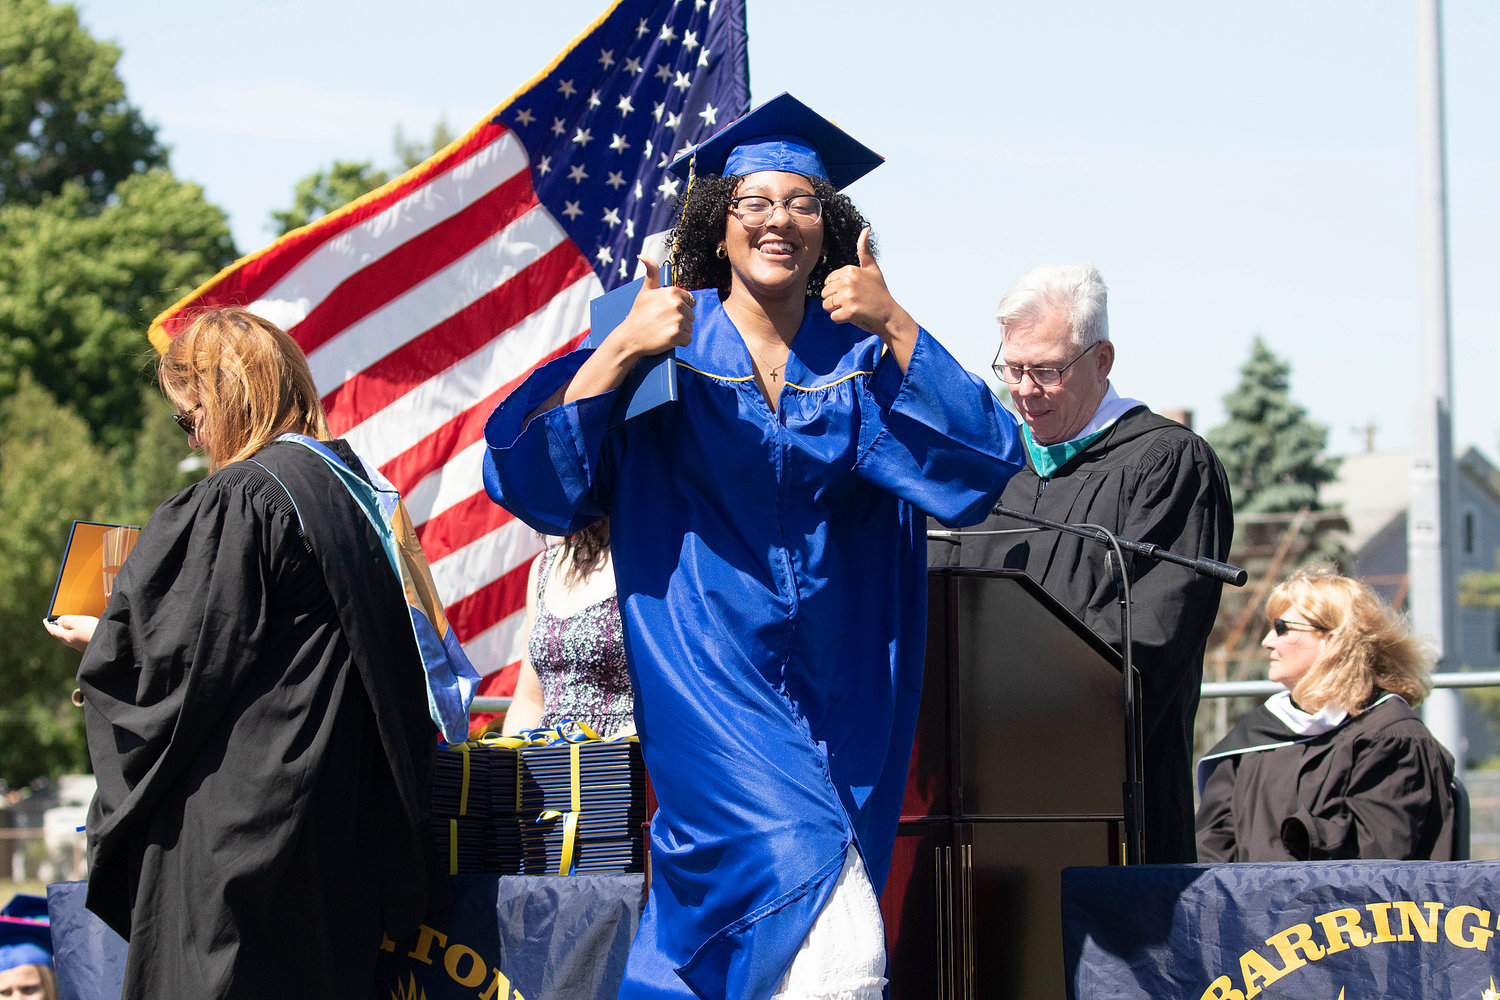 A Barrington High School graduate shares two thumbs up after receiving her diploma during the ceremony on Sunday.